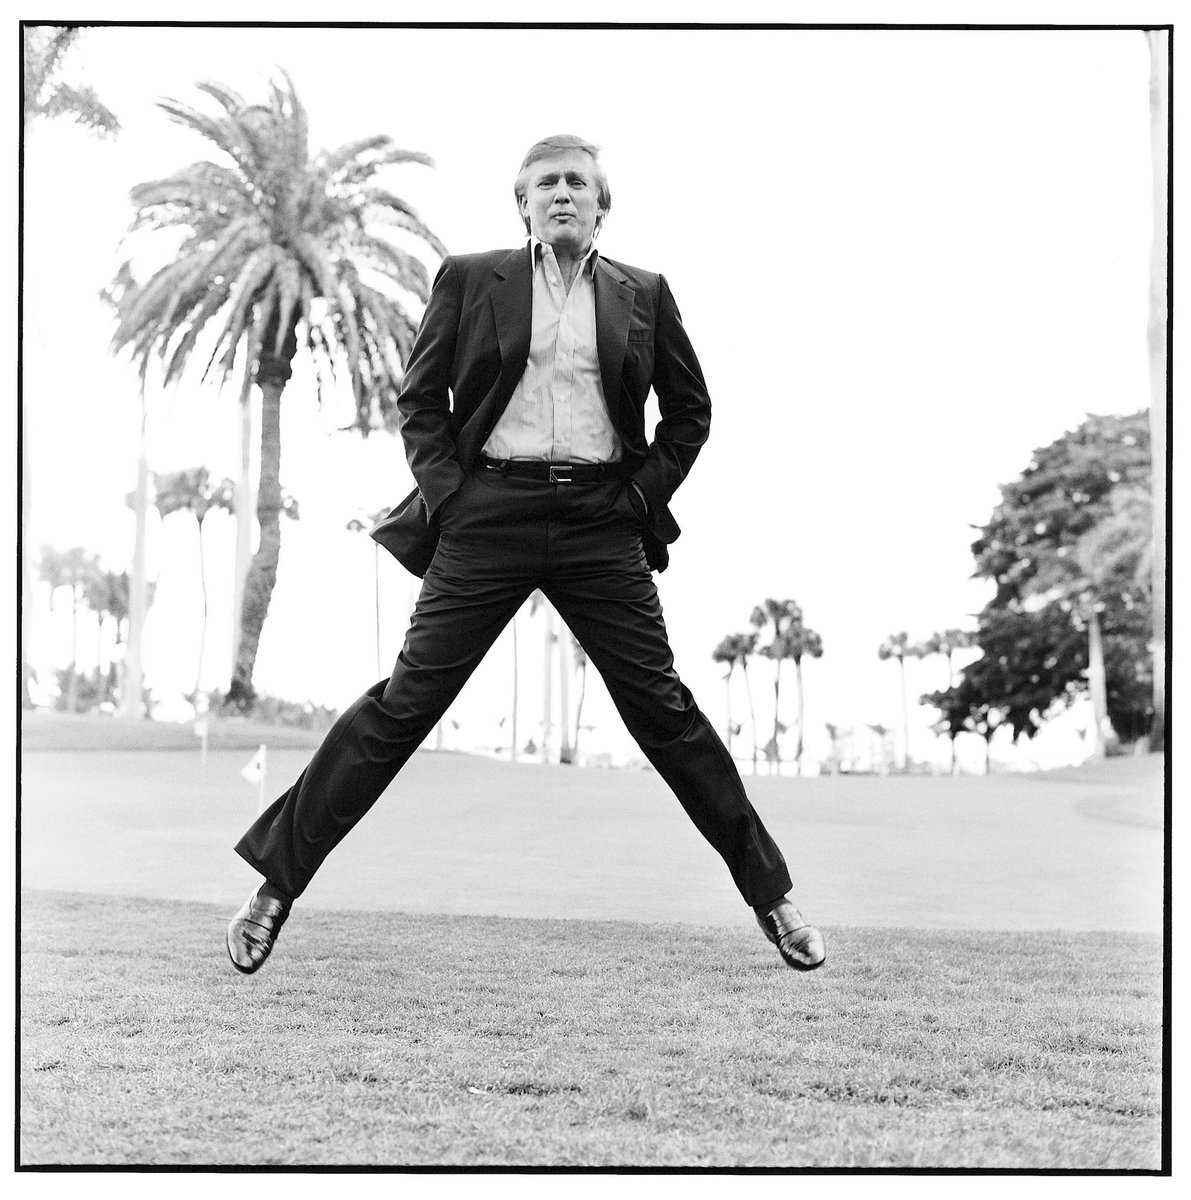 Happy DJT Day, everybody!4-10-20Here’s a thread filled with some of my favorite photos and memes of the legend himself. I really love this man. Please feel free to add your favorites below.